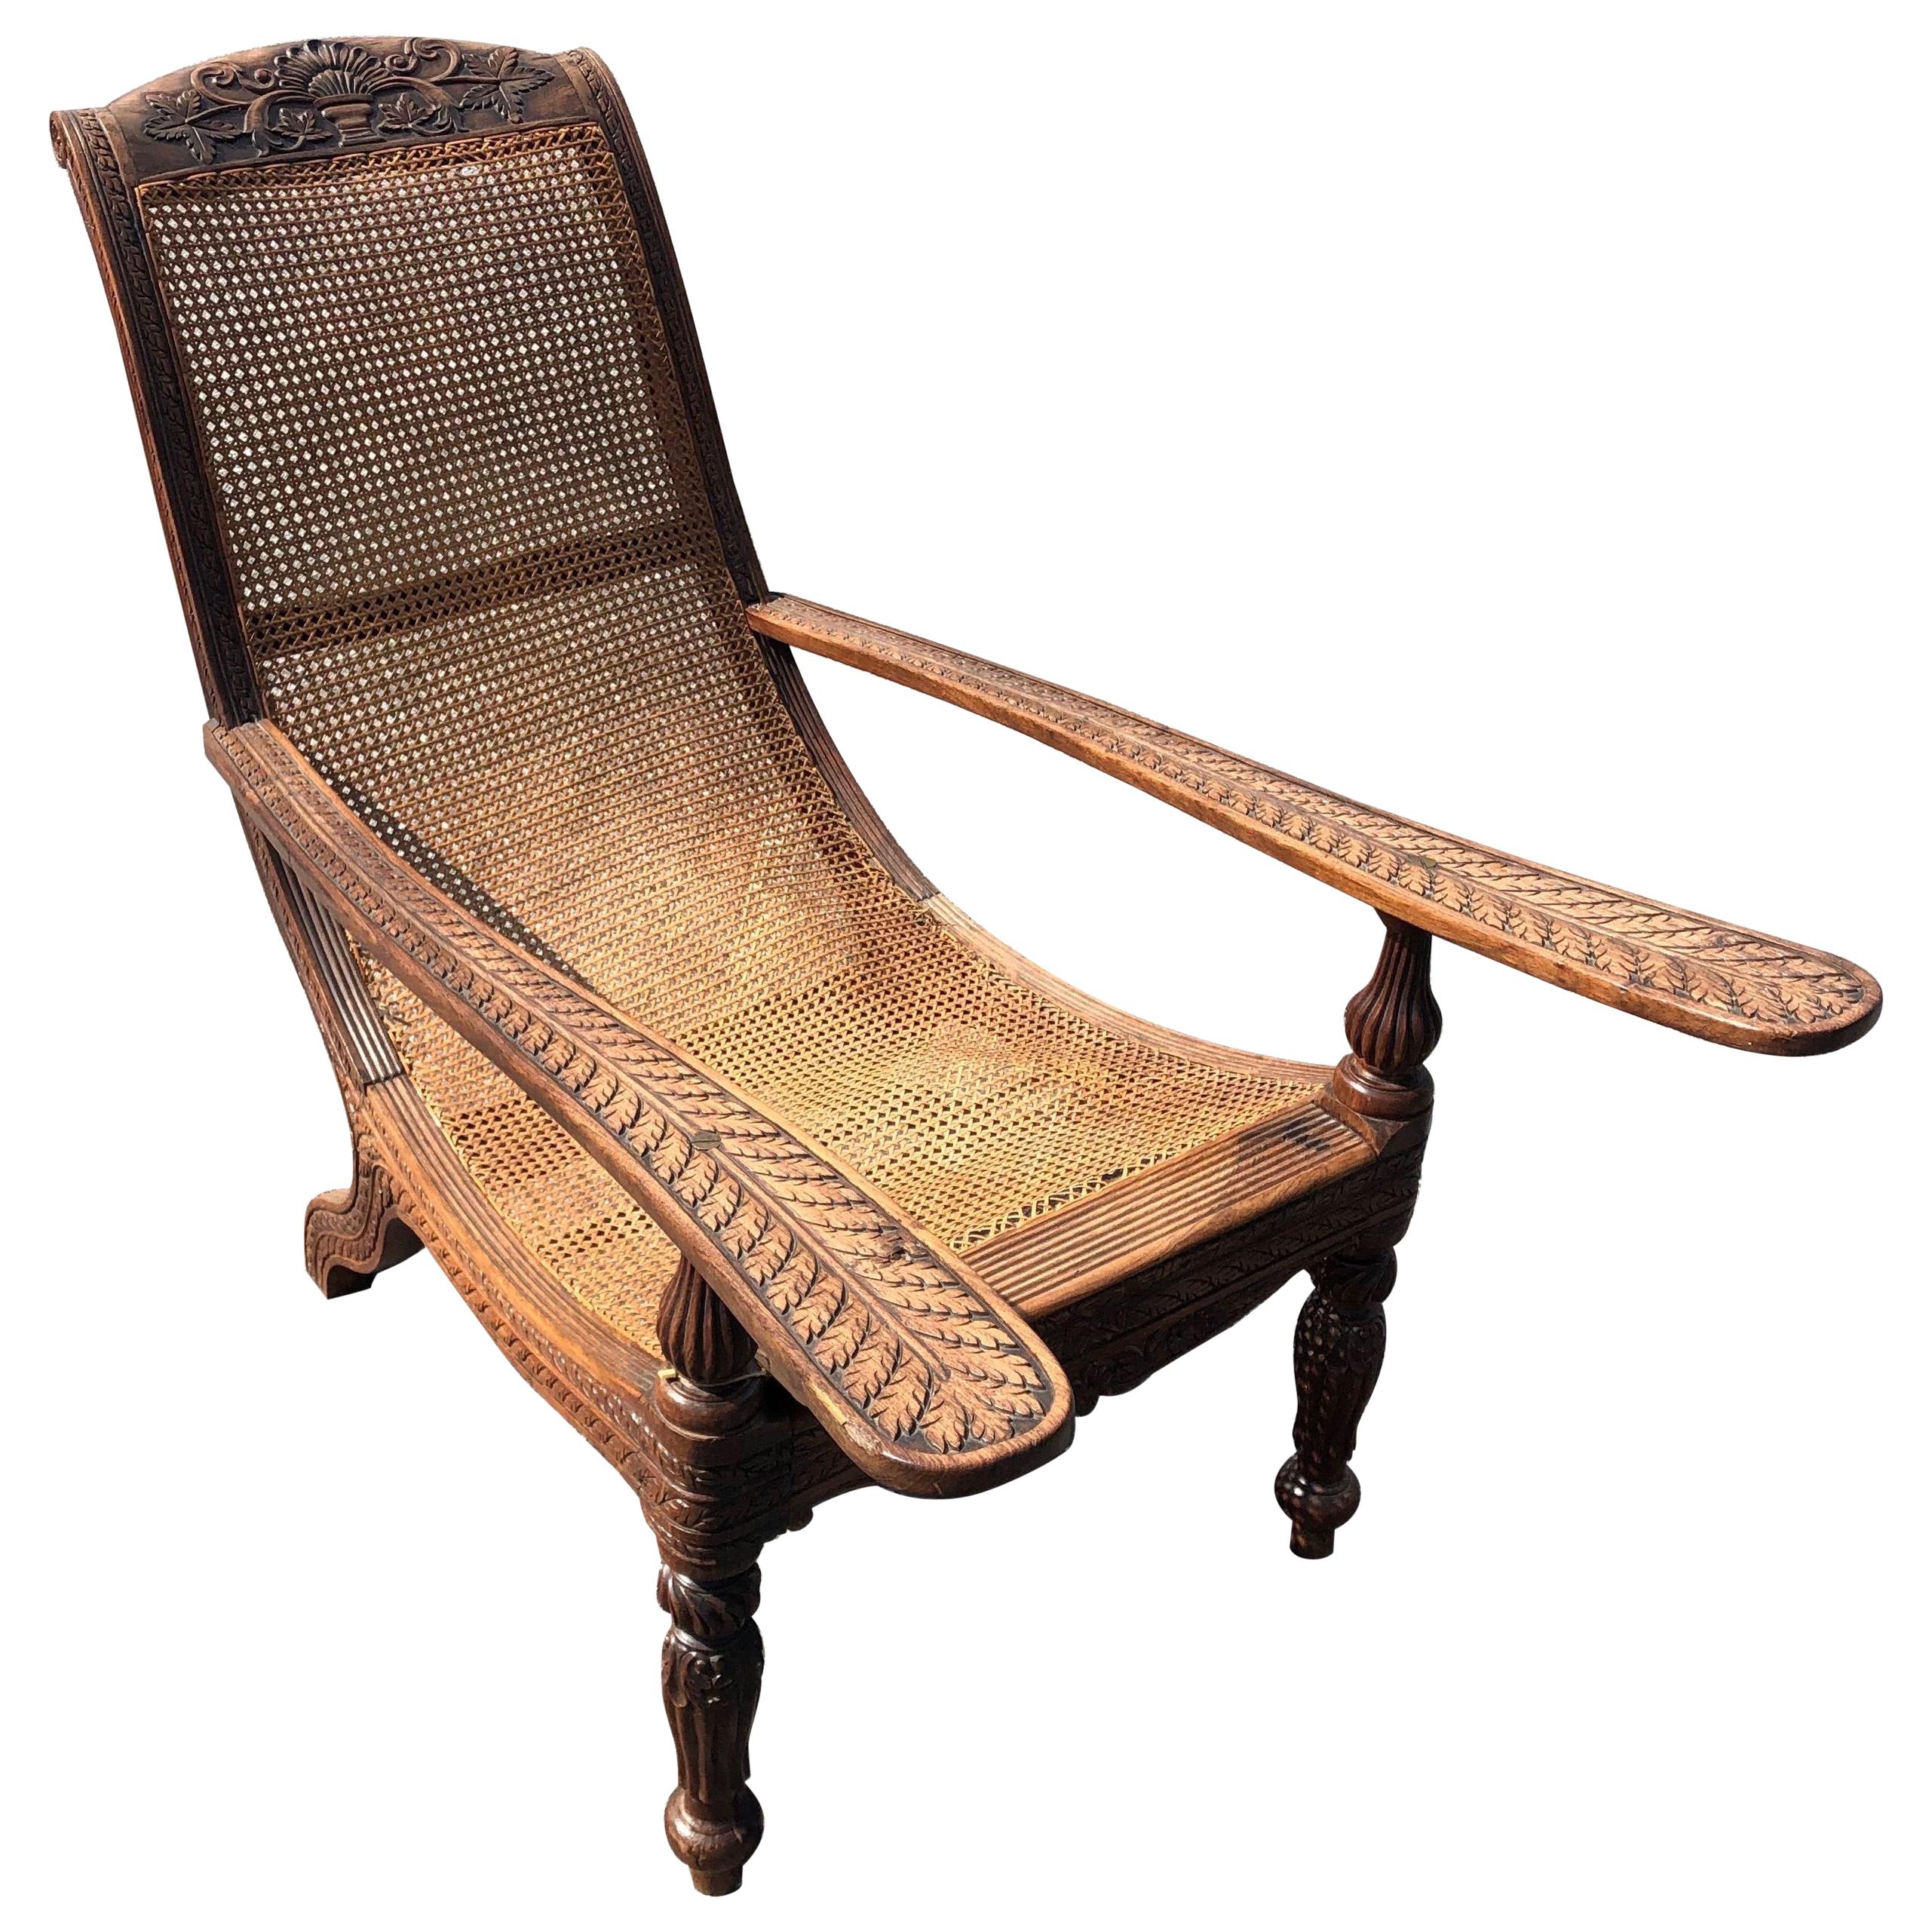 Carved 19th Century West Indies Rosewood Plantation Chair For Sale